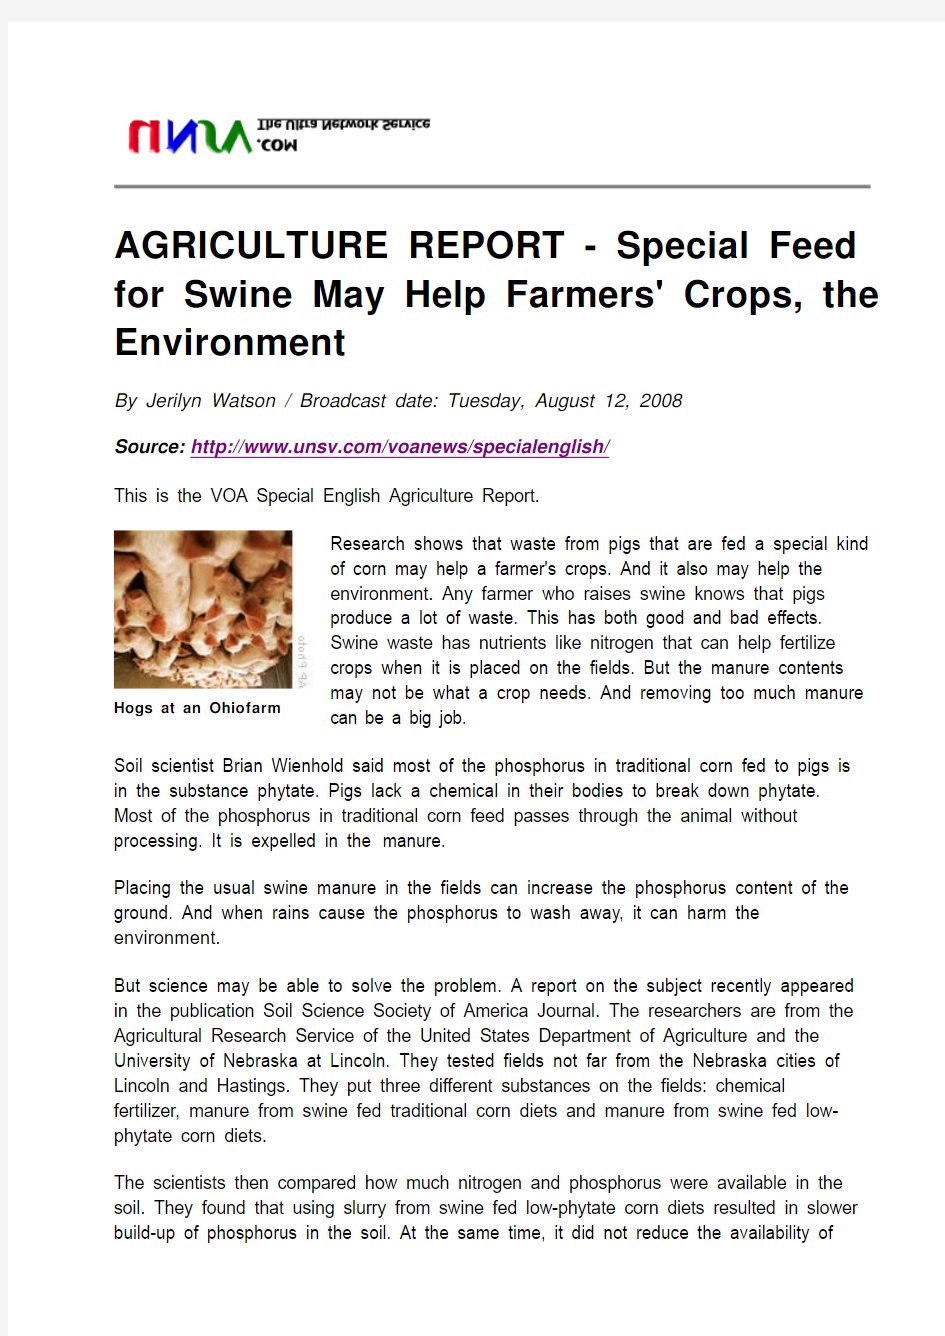 AGRICULTURE REPORT - Special Feed for Swine May Help Farmers' Crops, the Environment